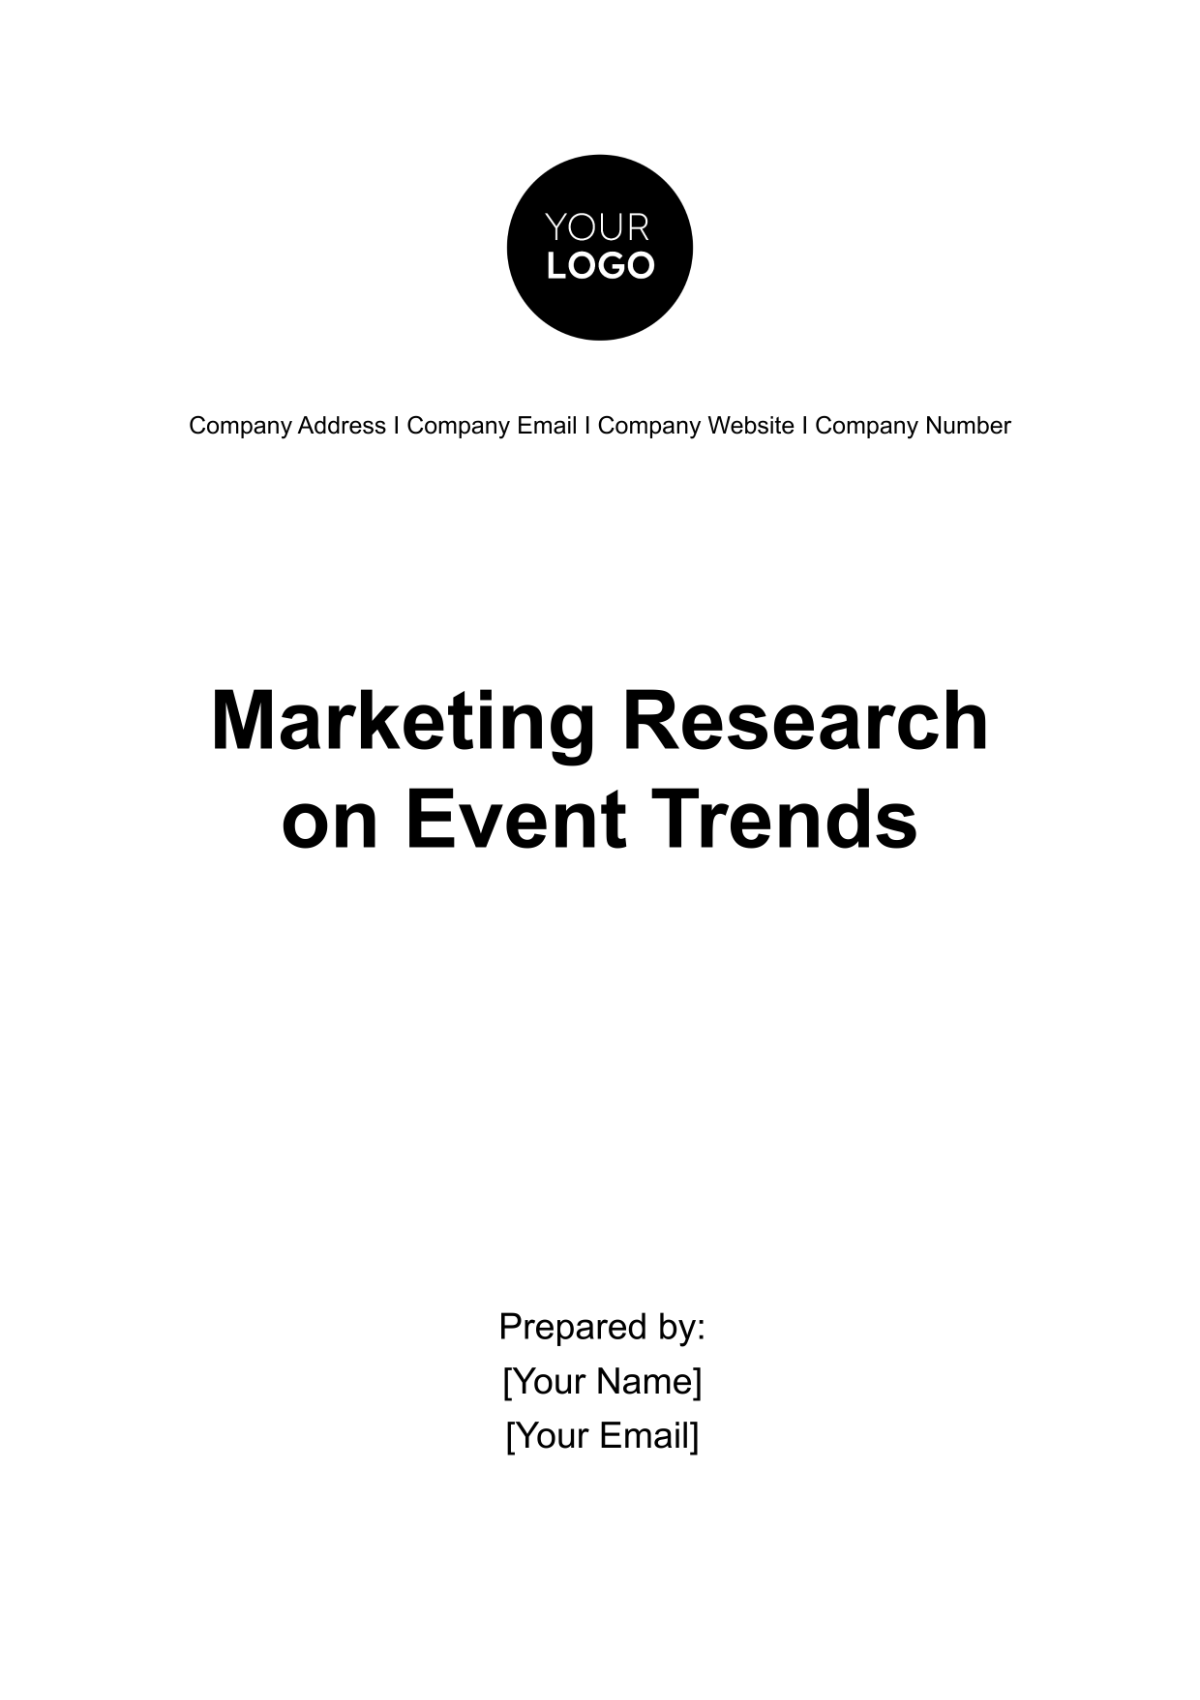 Free Marketing Research on Event Trends Template